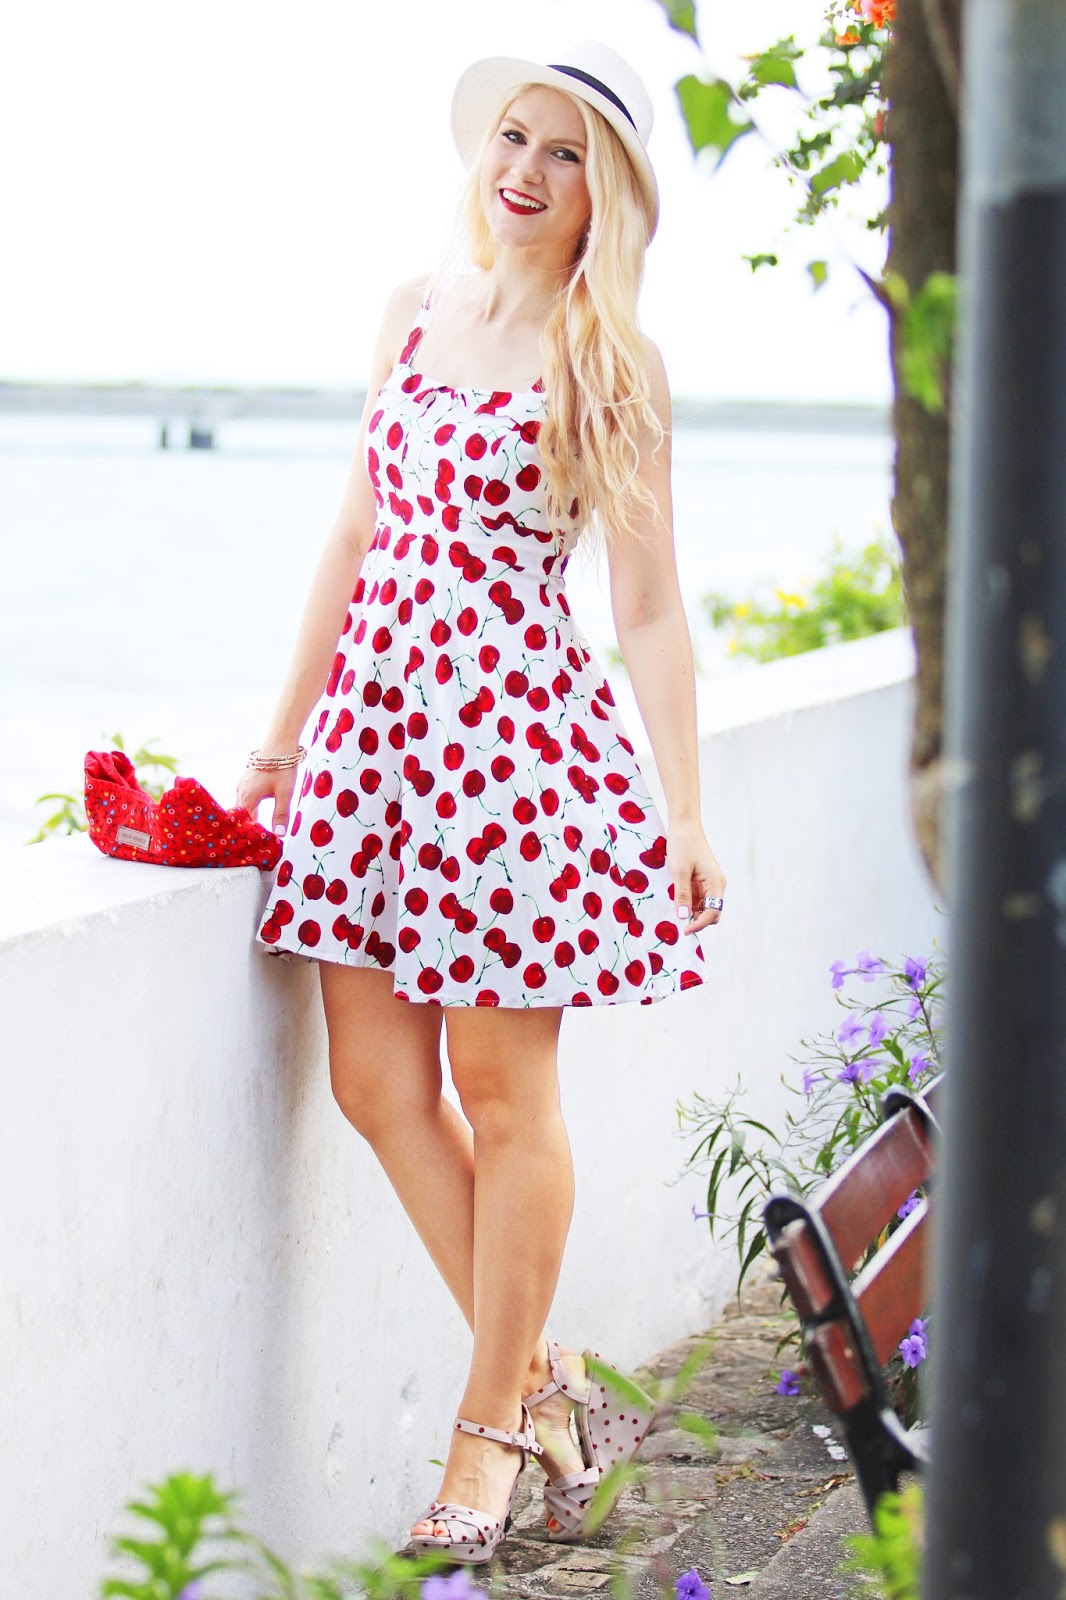 Cute cherry dress outfit for Summer